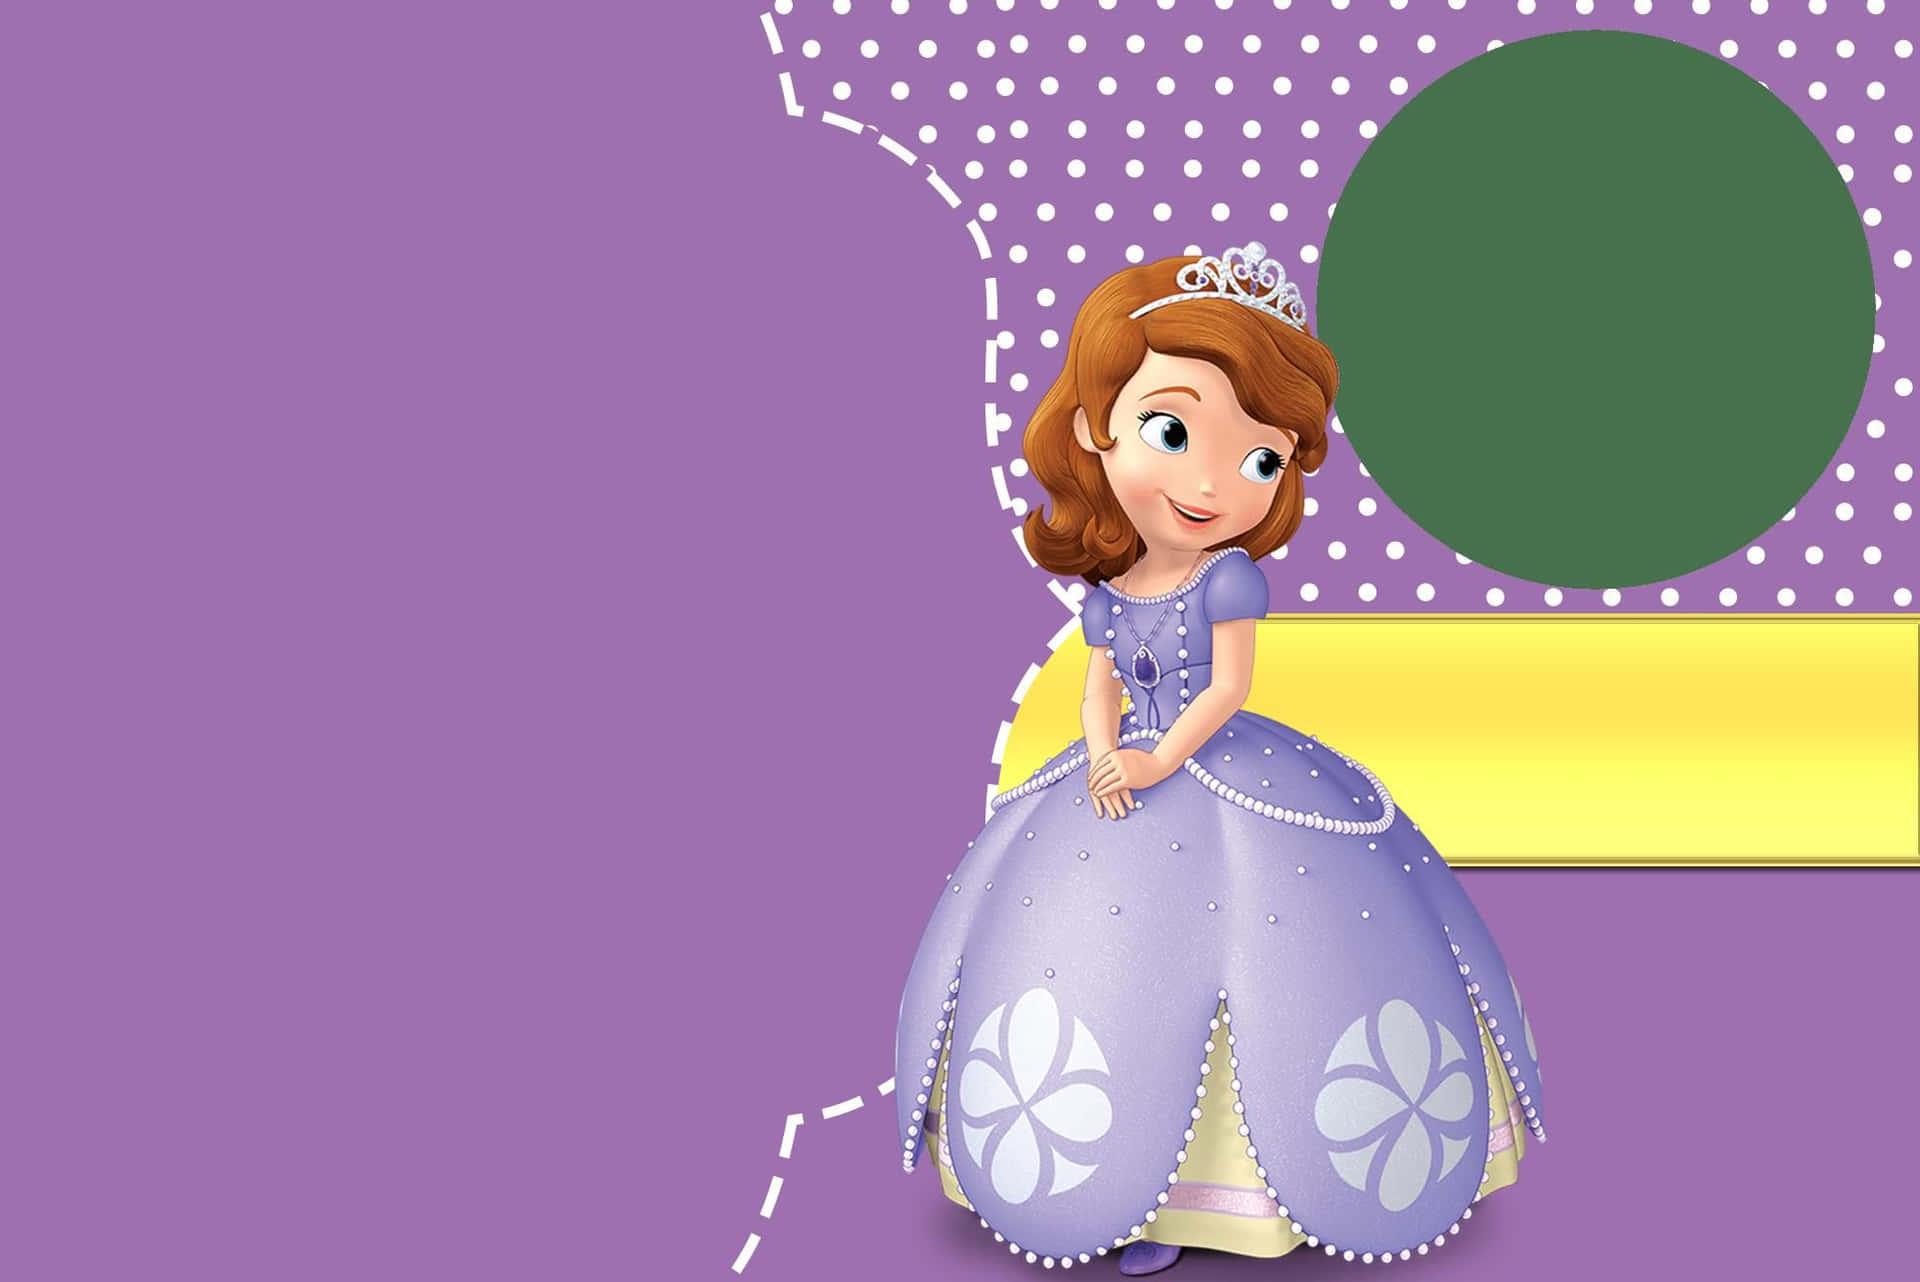 Sofia The First showing off her big smile Wallpaper